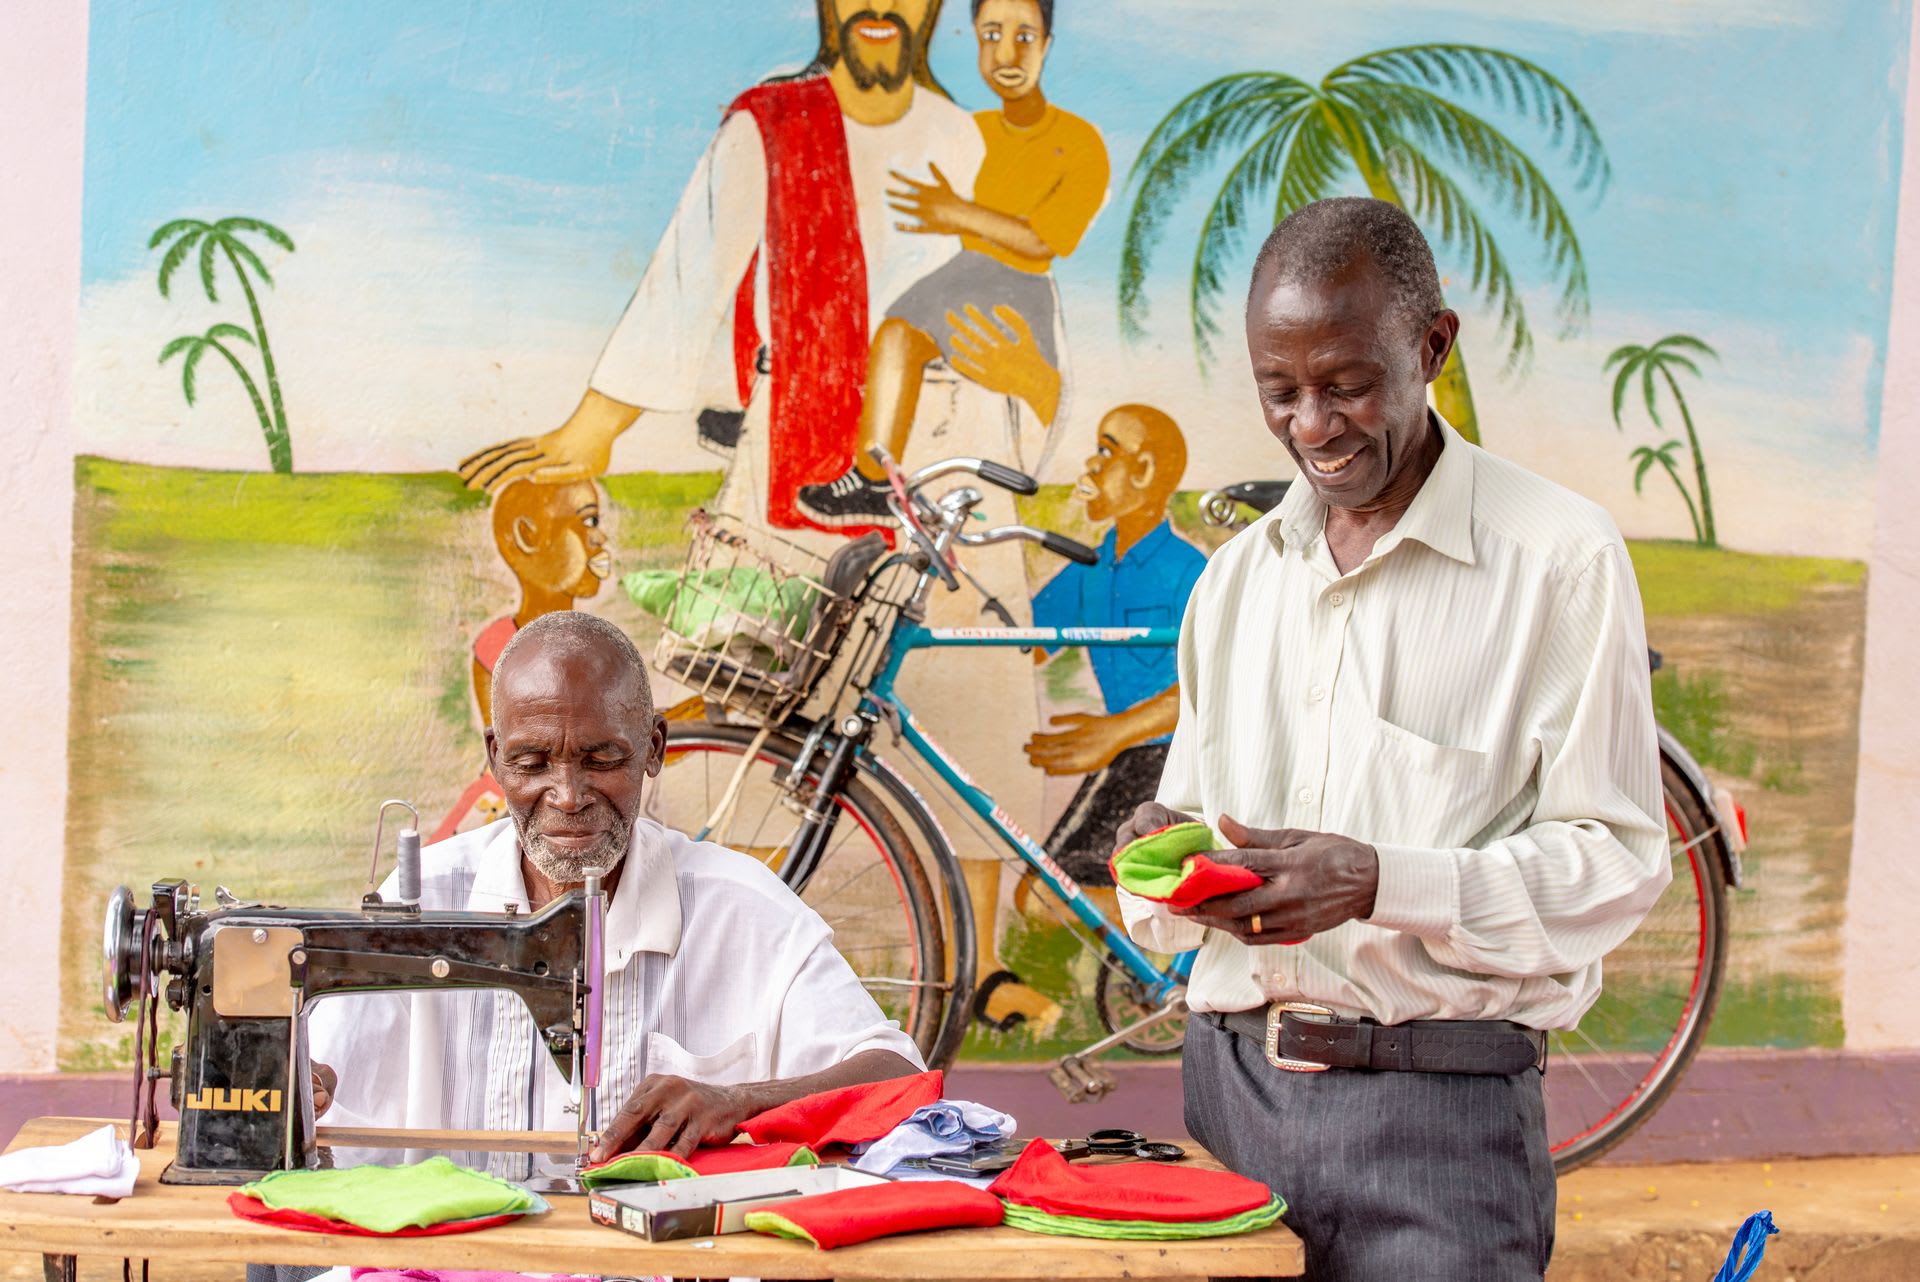 Two men at a table sewing sanitary pads.